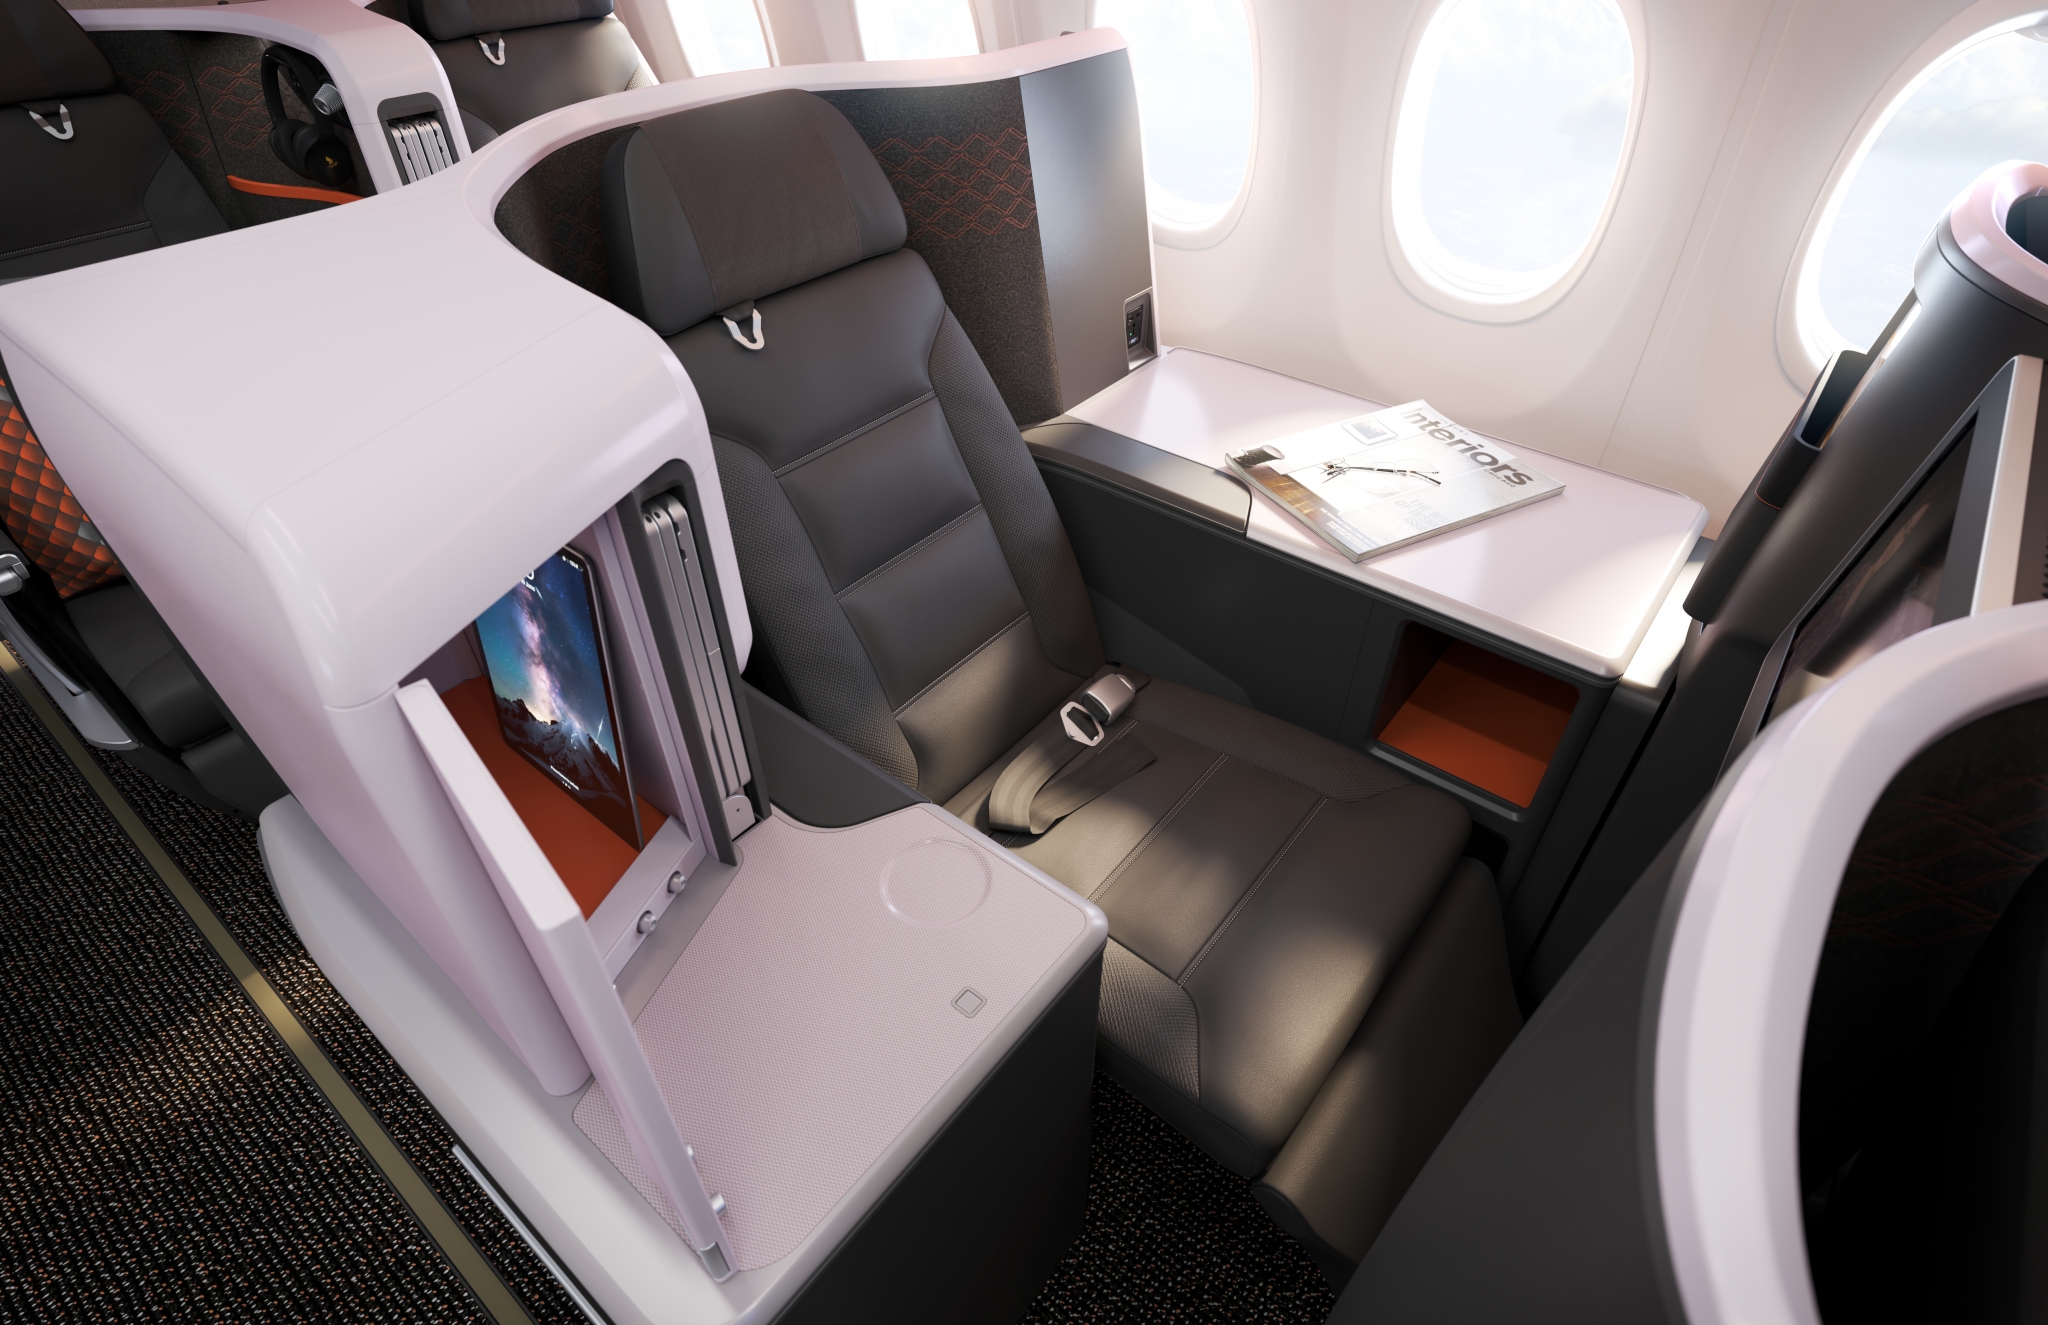 Singapore Airlines Boeing 737-800 Business class